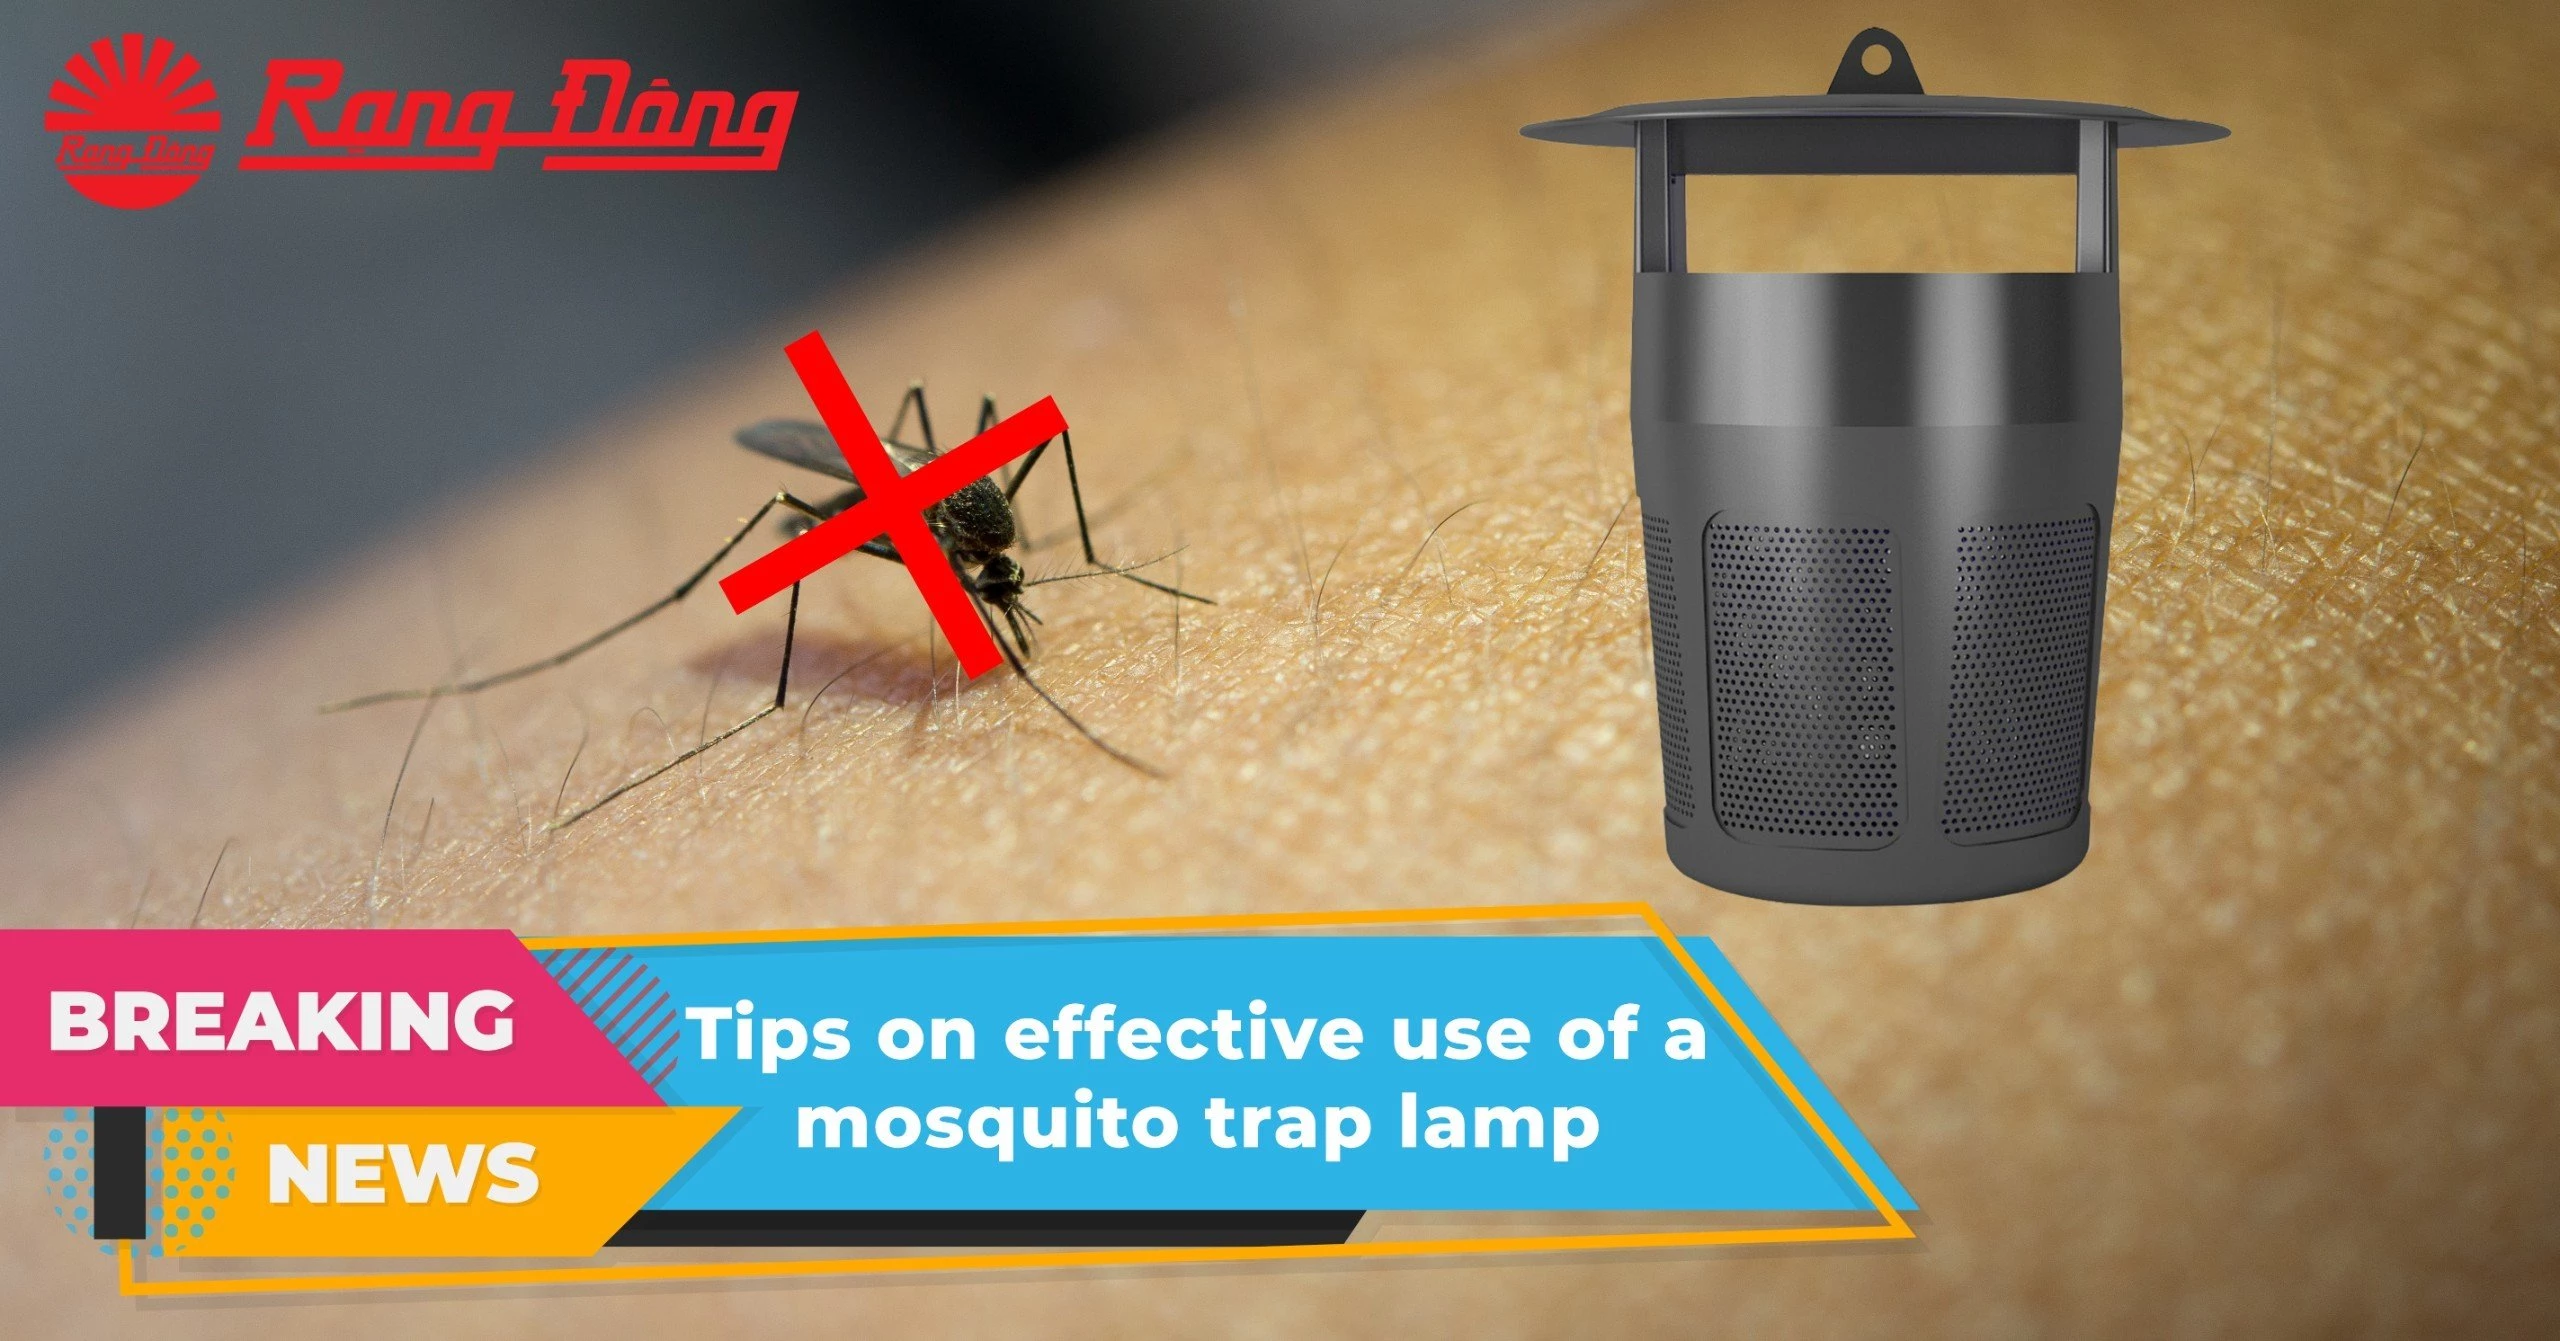 Tips on effective use of a mosquito trap lamp